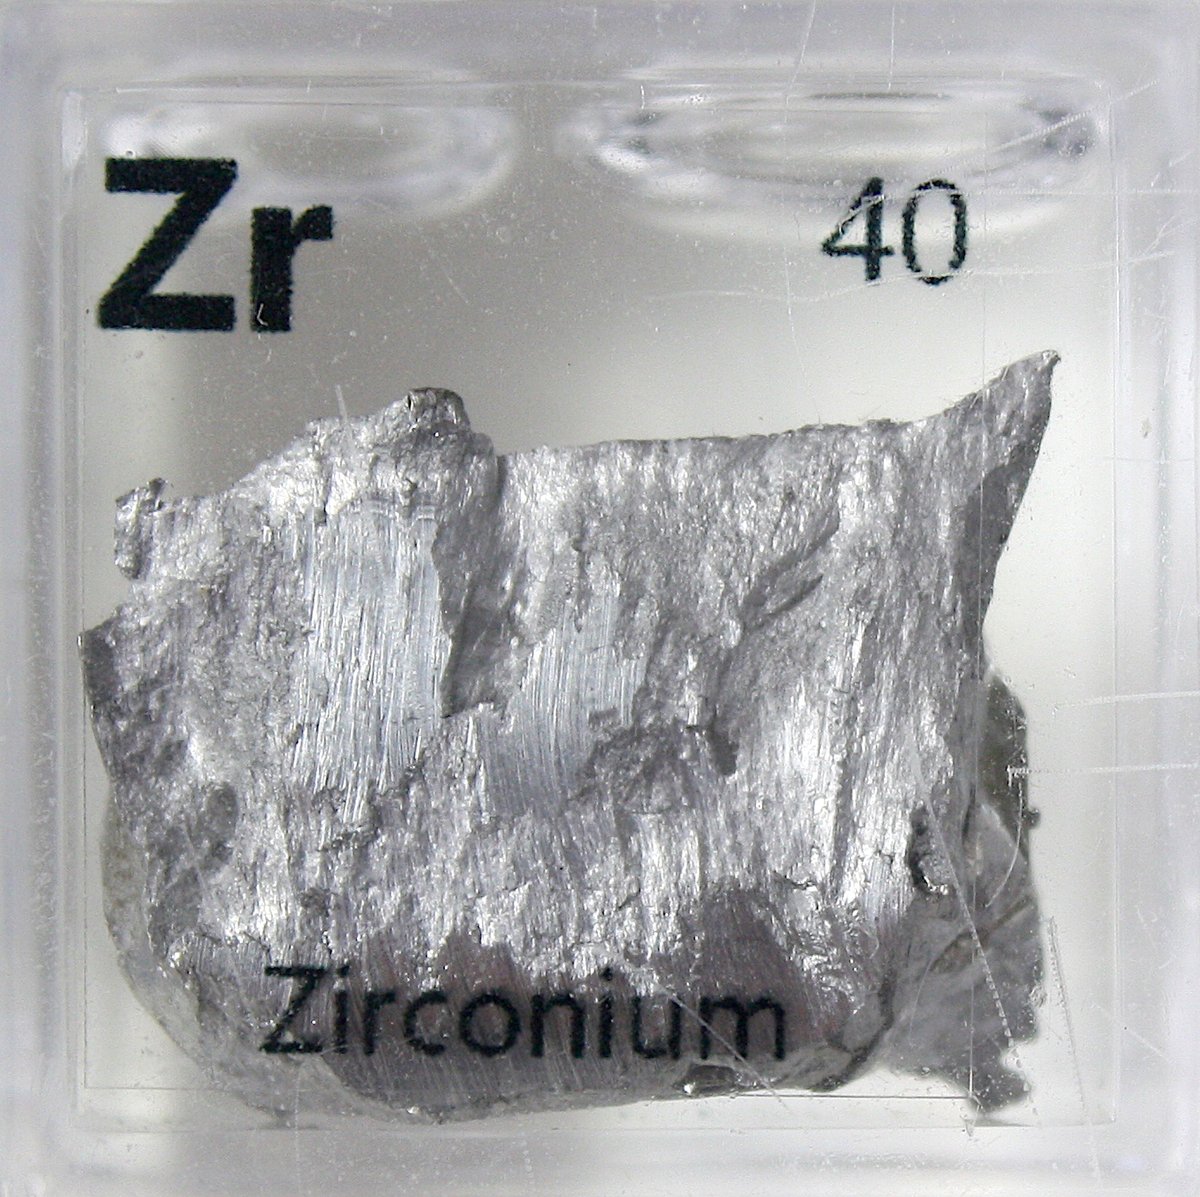 Zirconium  #elementphotos, including some sparkly cubic zirconia (ZrO2) crystals. The cubic phase actually requires dopants (Ca or Y) to be stable at room temperature; undoped, zirconia is normally monoclinic at RT. There's also a tetragonal phase.